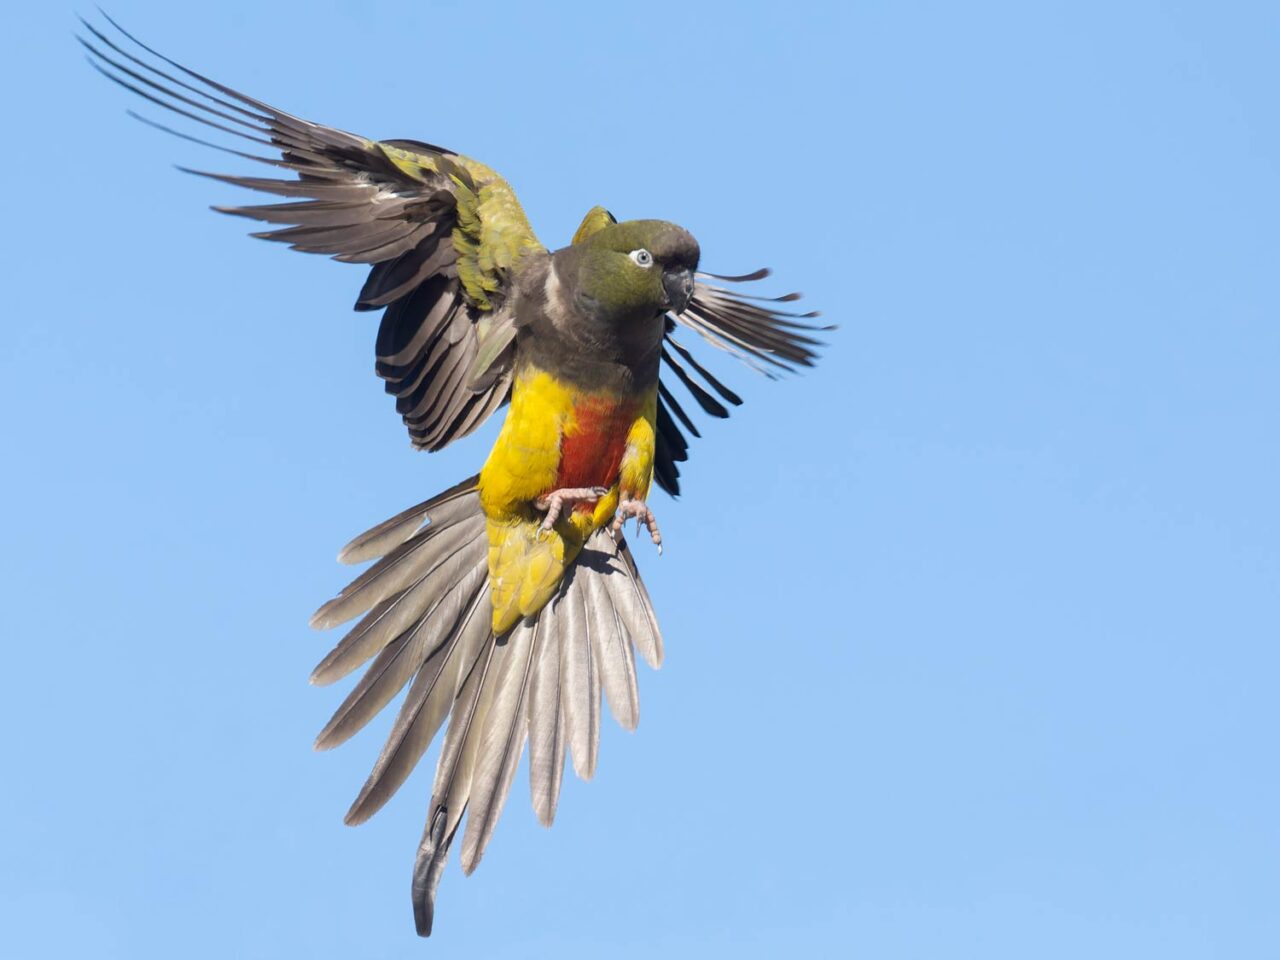 A green and yellow parakeet with wings and tail spread against a blue sky.